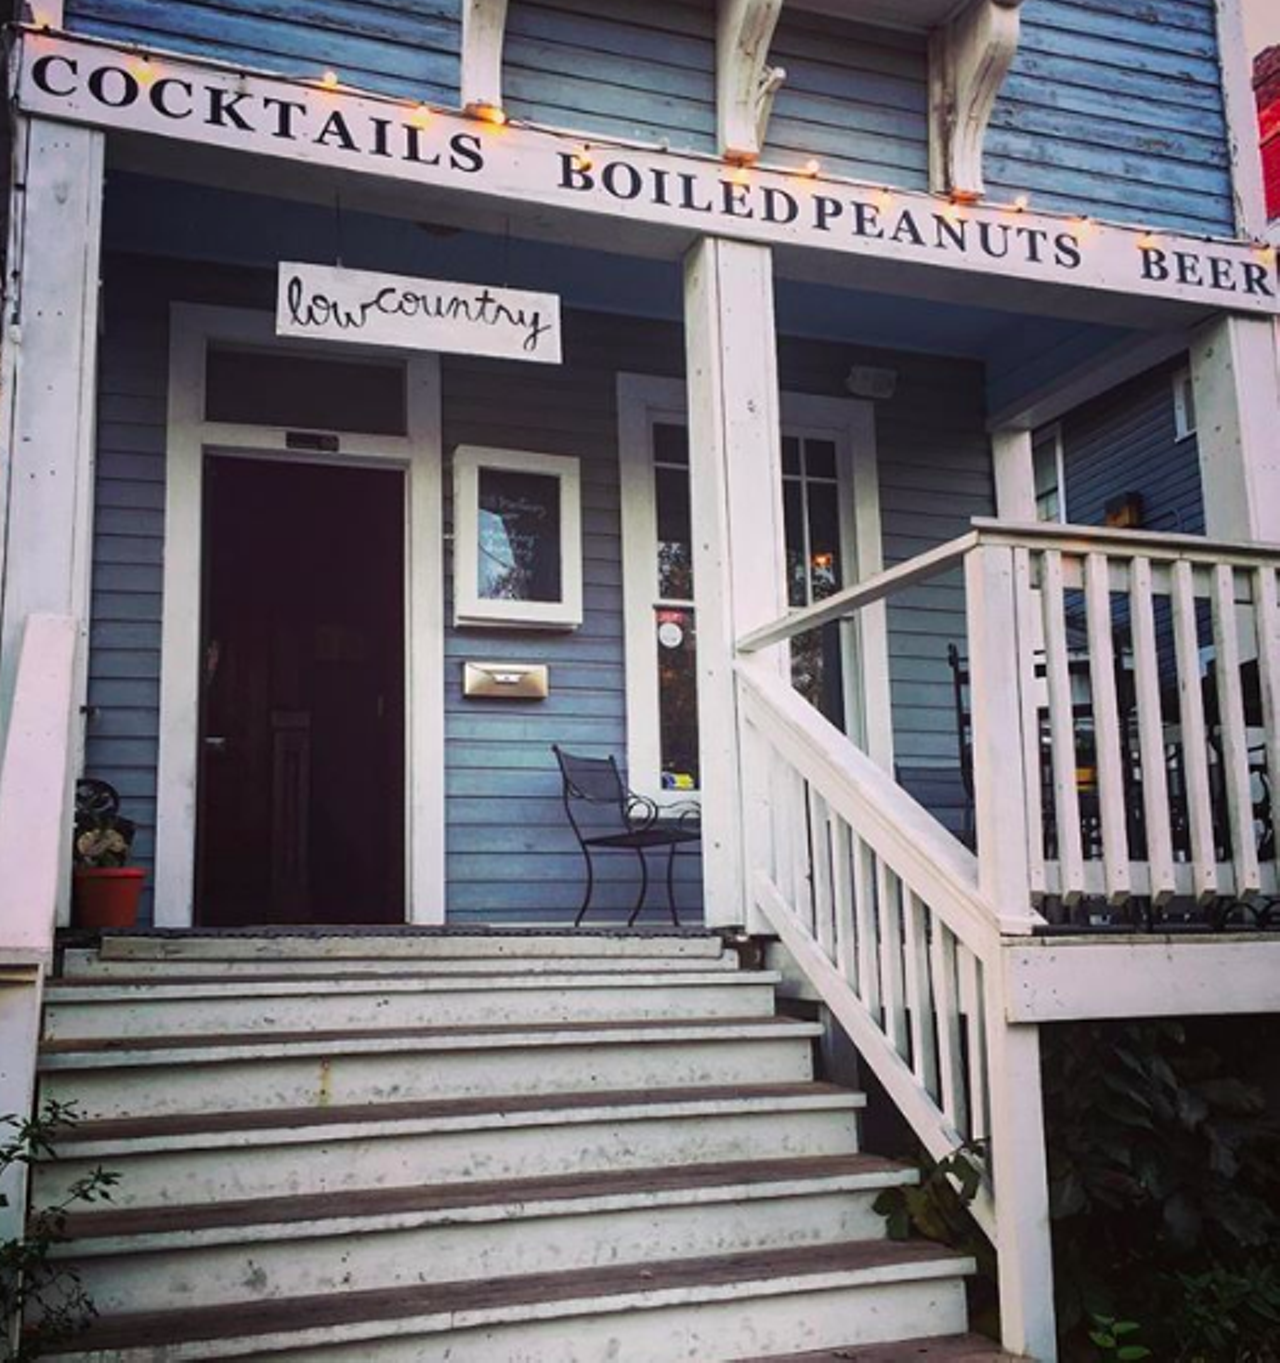 Lowcountry
318 Martinez St, (210) 560-2224, facebook.com
Solid drinks, a country theme and laid-back? Yup, Lowcountry has it all. Plus, it has live music to boot that will have you comin’ over on at least a weekly basis.
Photo via Instagram / do210